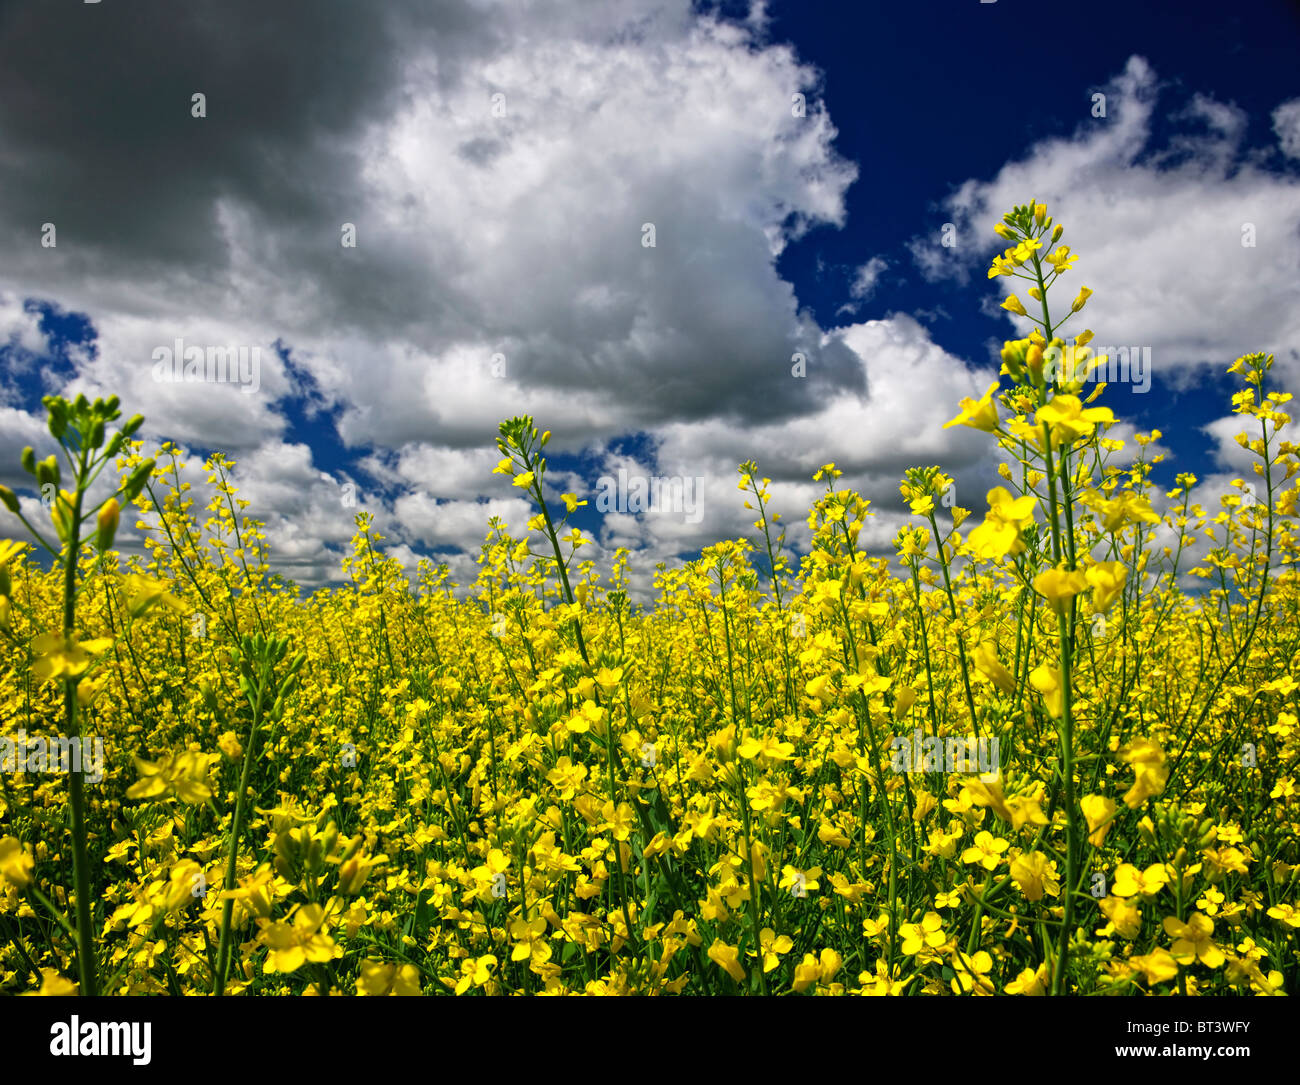 Agricultural landscape of canola or rapeseed farm field in Manitoba, Canada Stock Photo